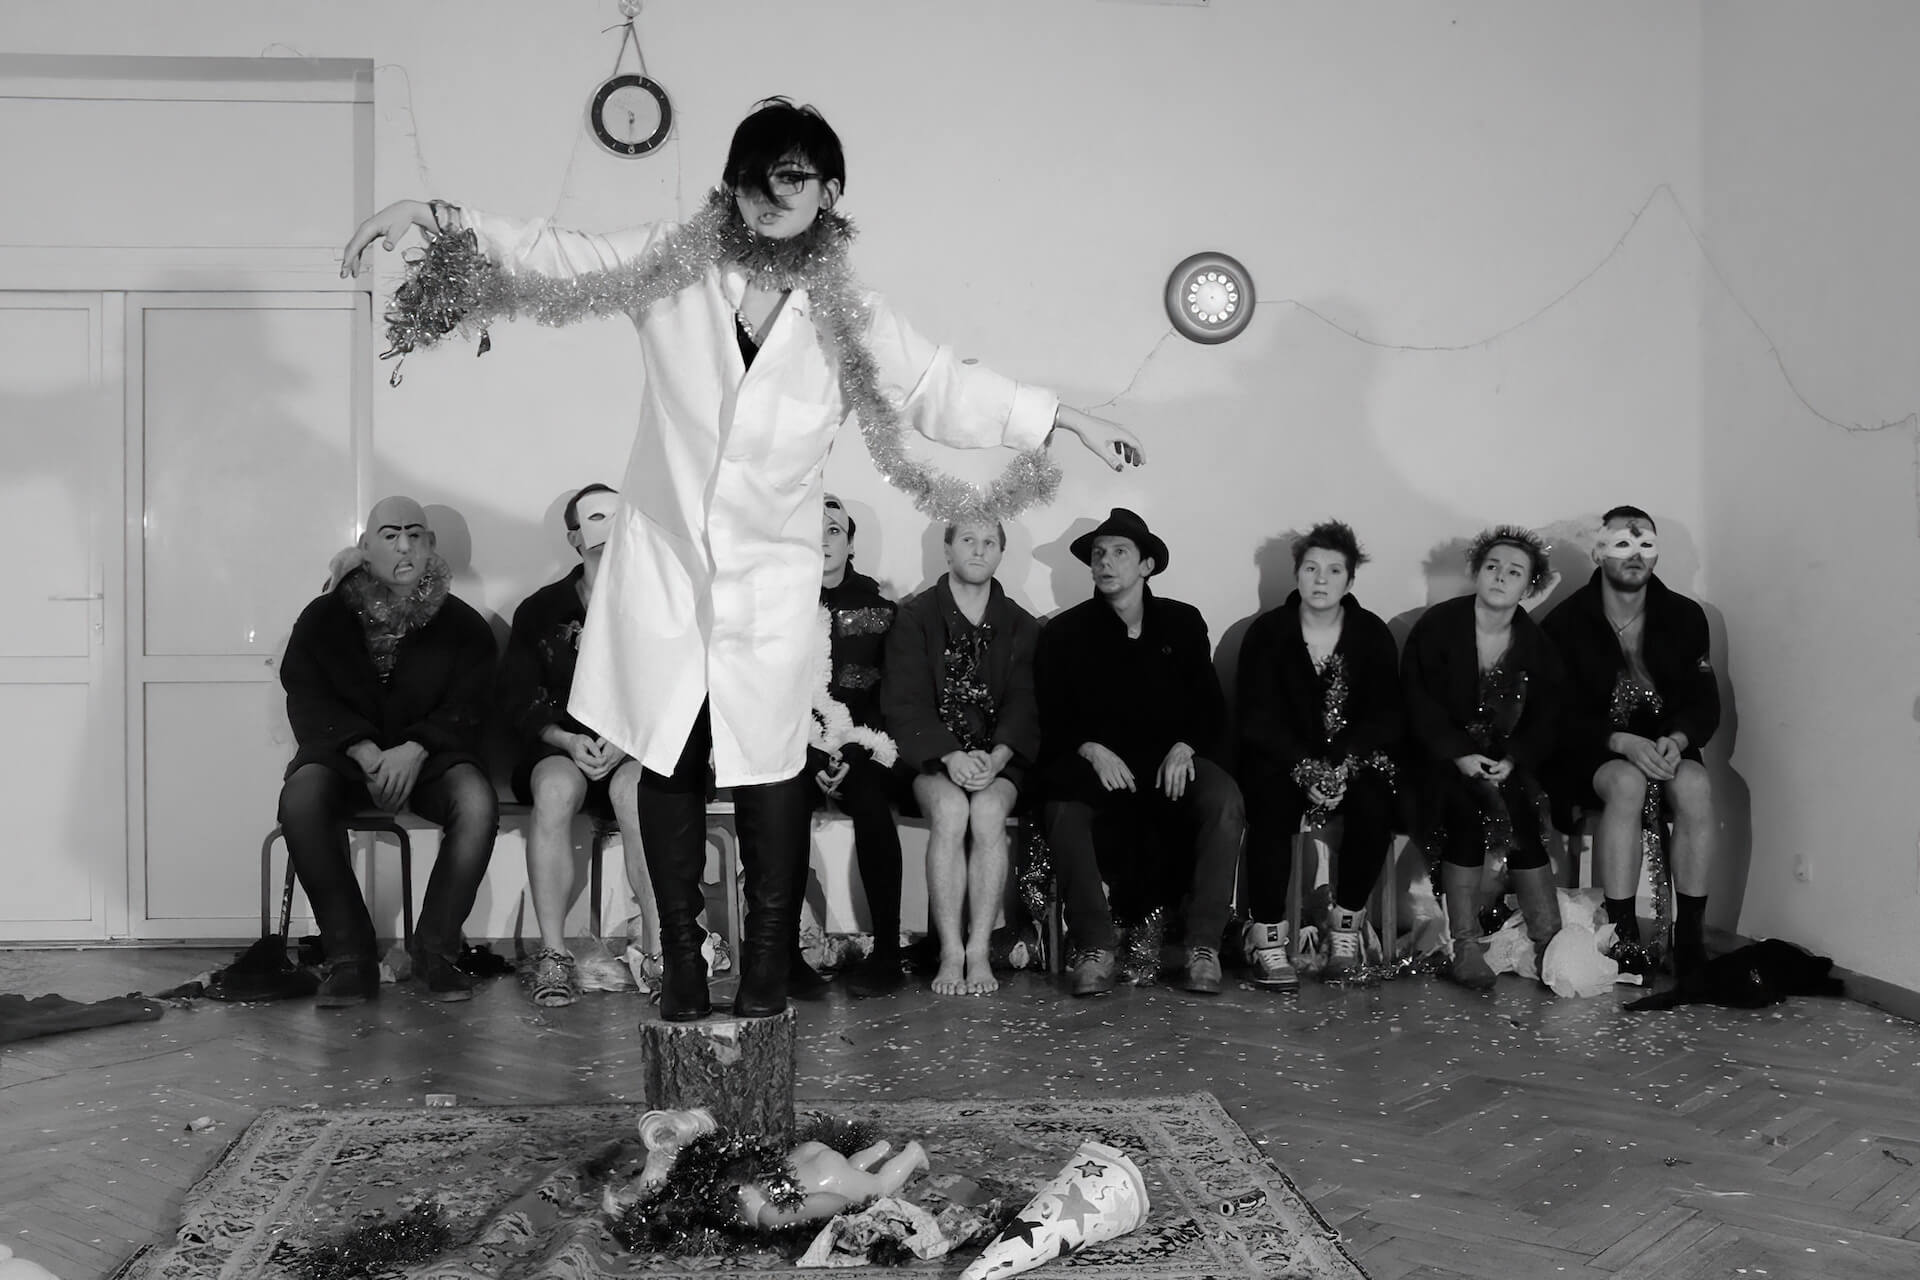 Black and white image of a performer standing on a log in the middle. This performer has handcuffs on the wrists which are linked together by long tinsel. The rest of the performers are sitting in the background on a chair, watching.